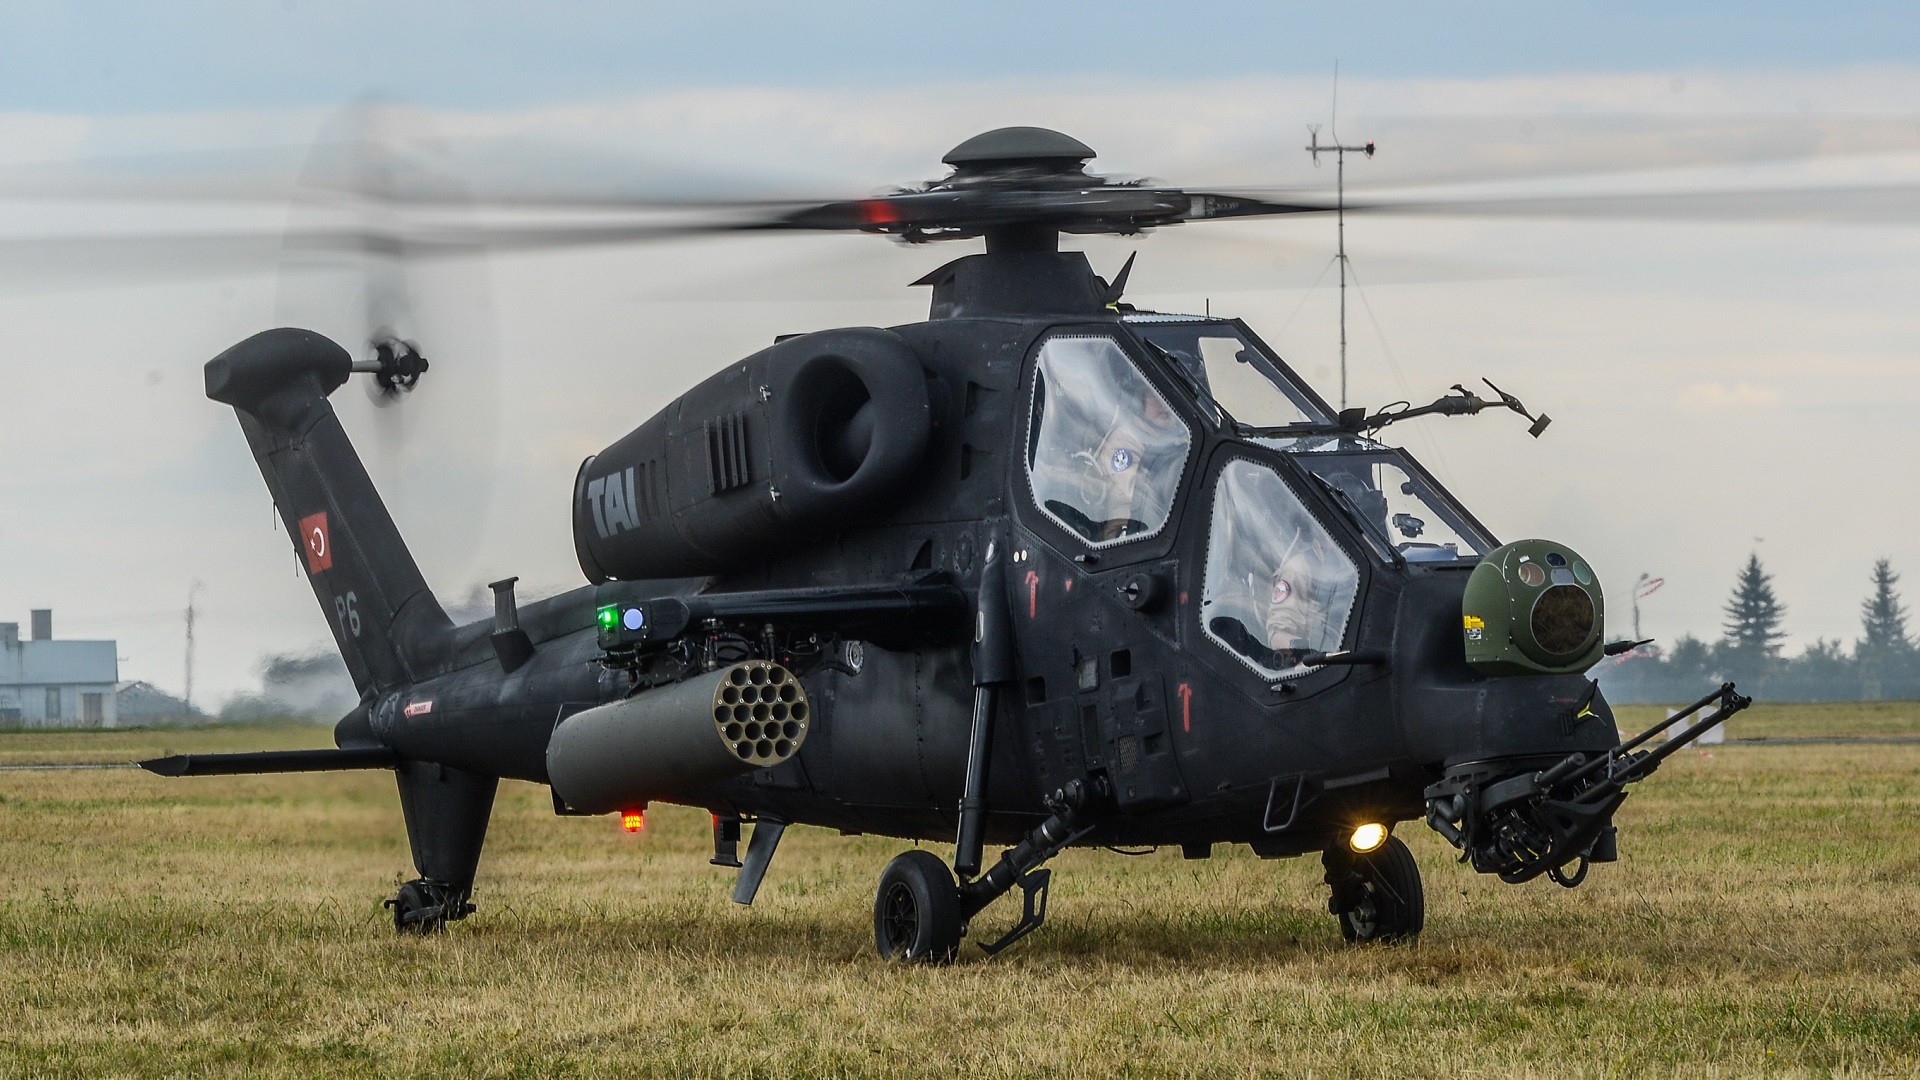 General 1920x1080 helicopters TAI/AgustaWestland T129 military Turkish Armed Forces Turkish Aerospace Industries attack helicopters aircraft military aircraft vehicle military vehicle